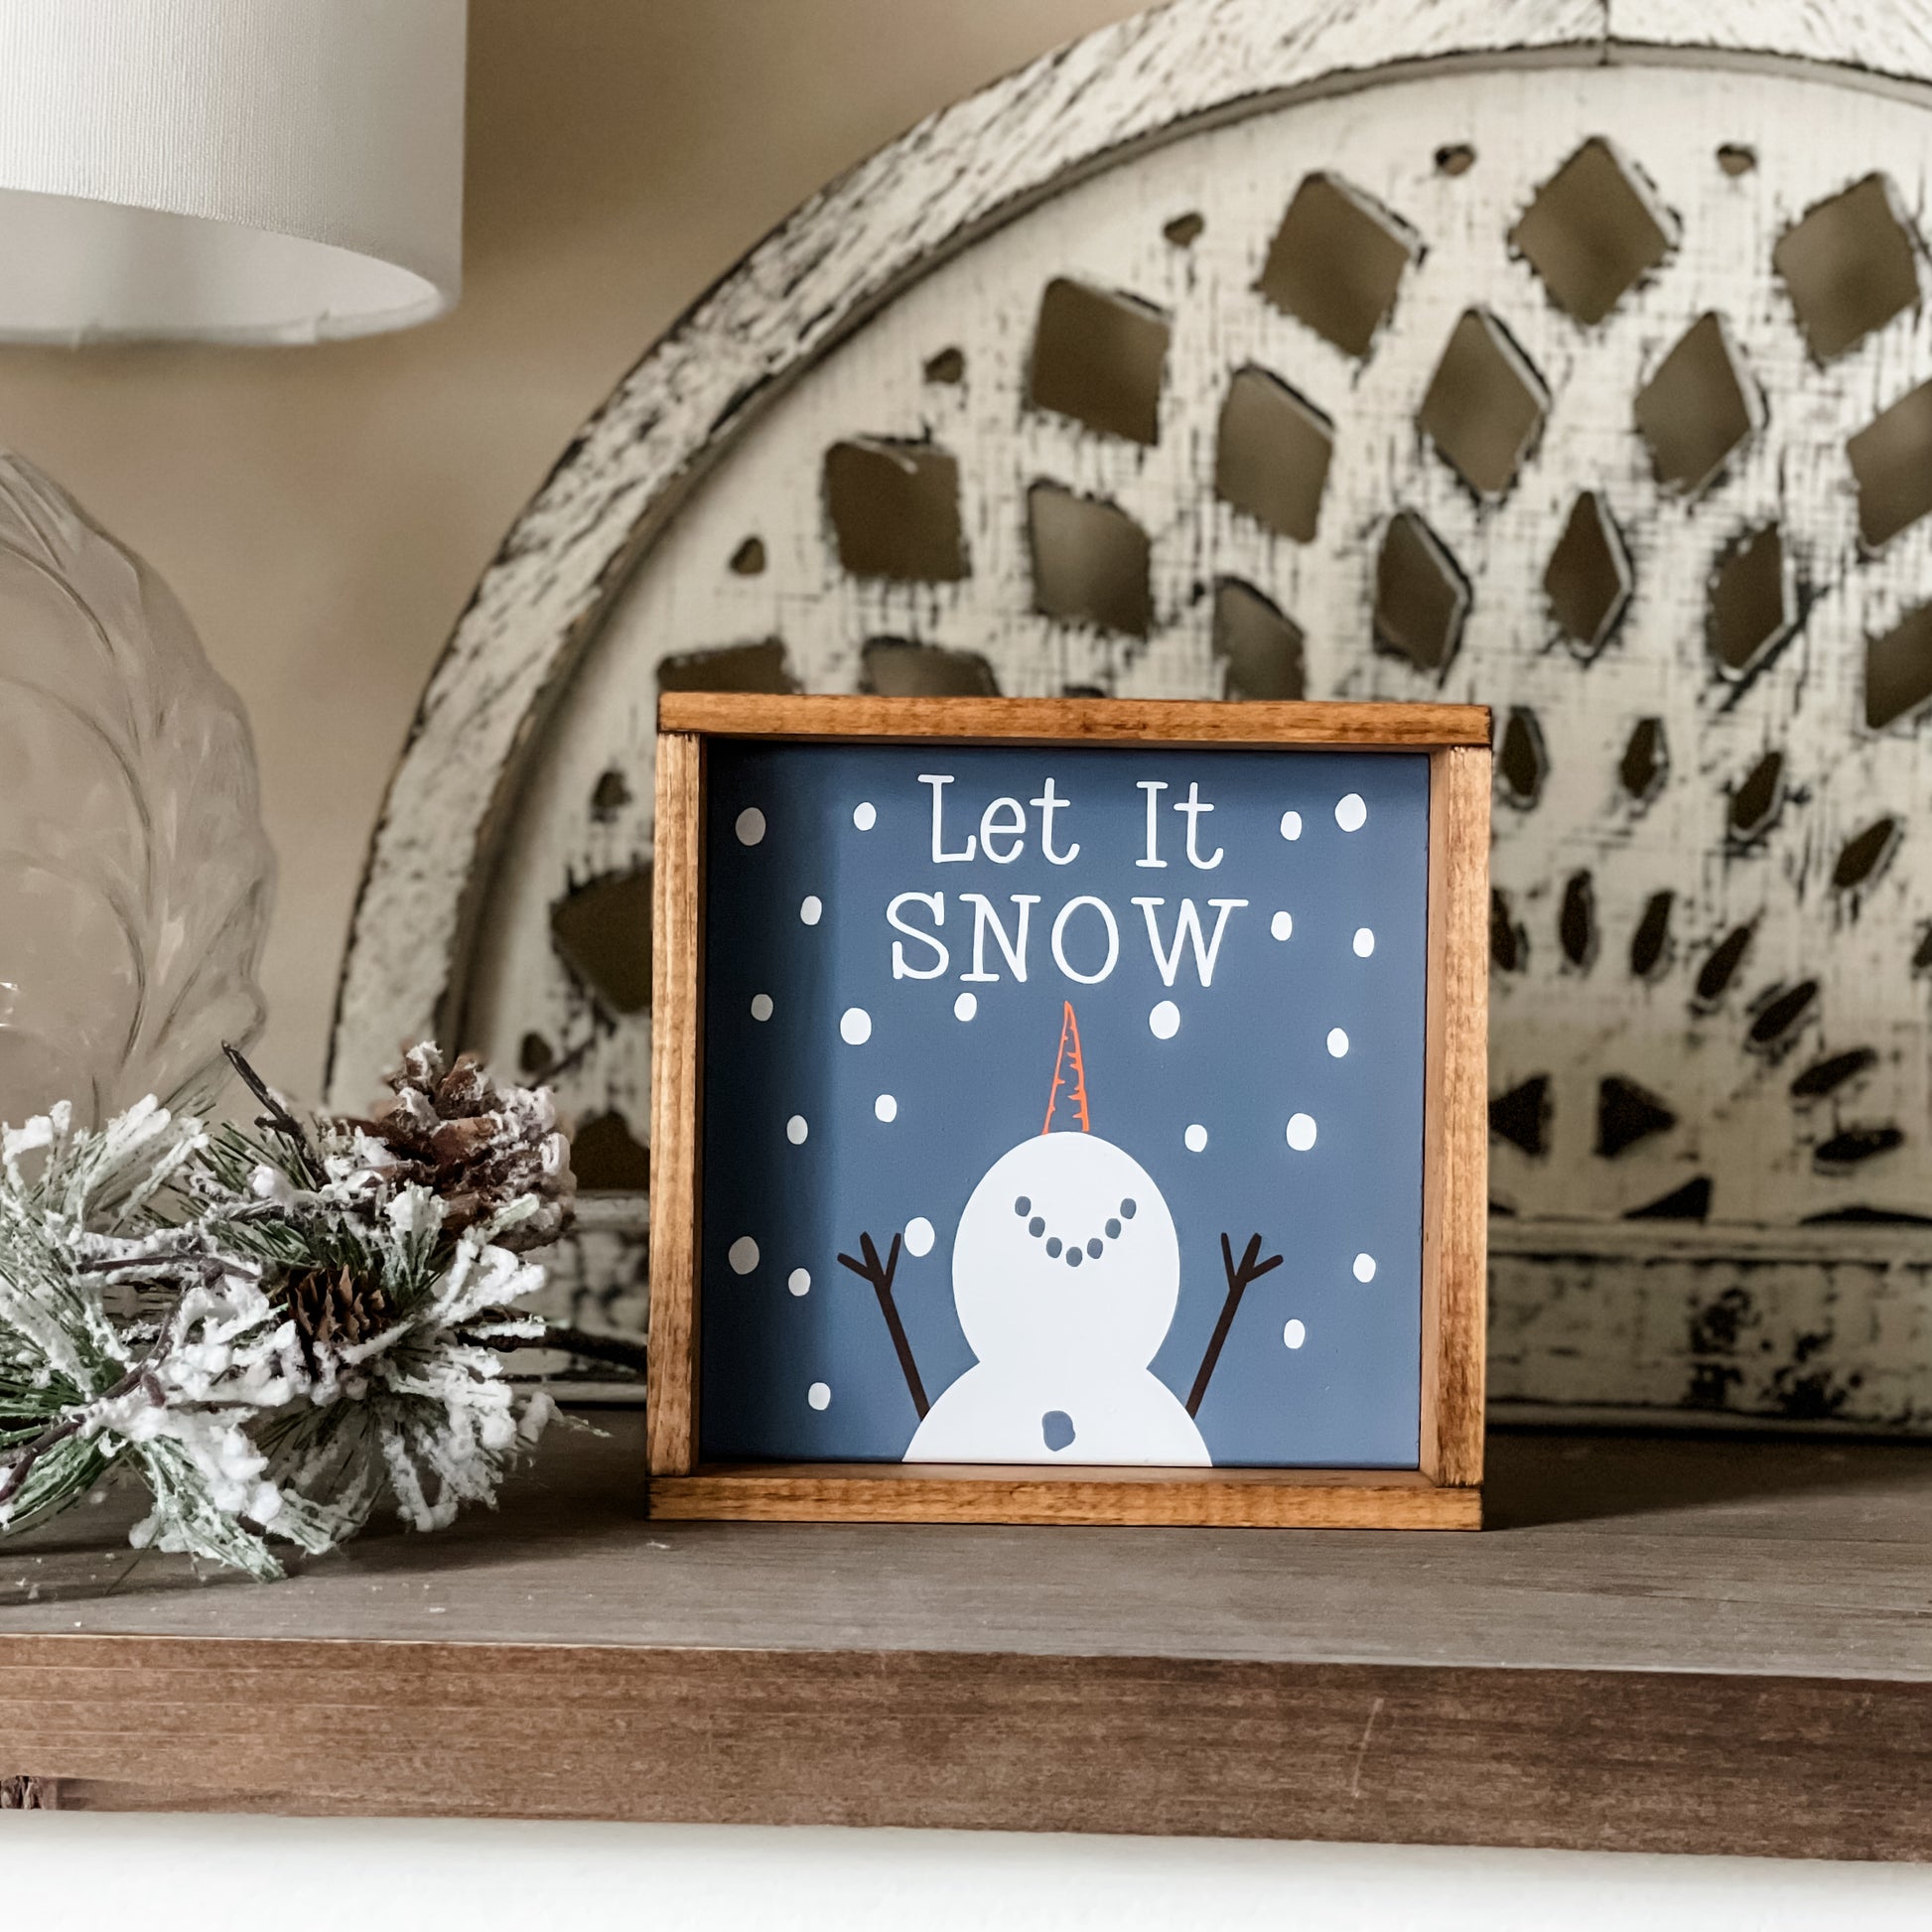 Let it snow snowman sign in smokey blue.